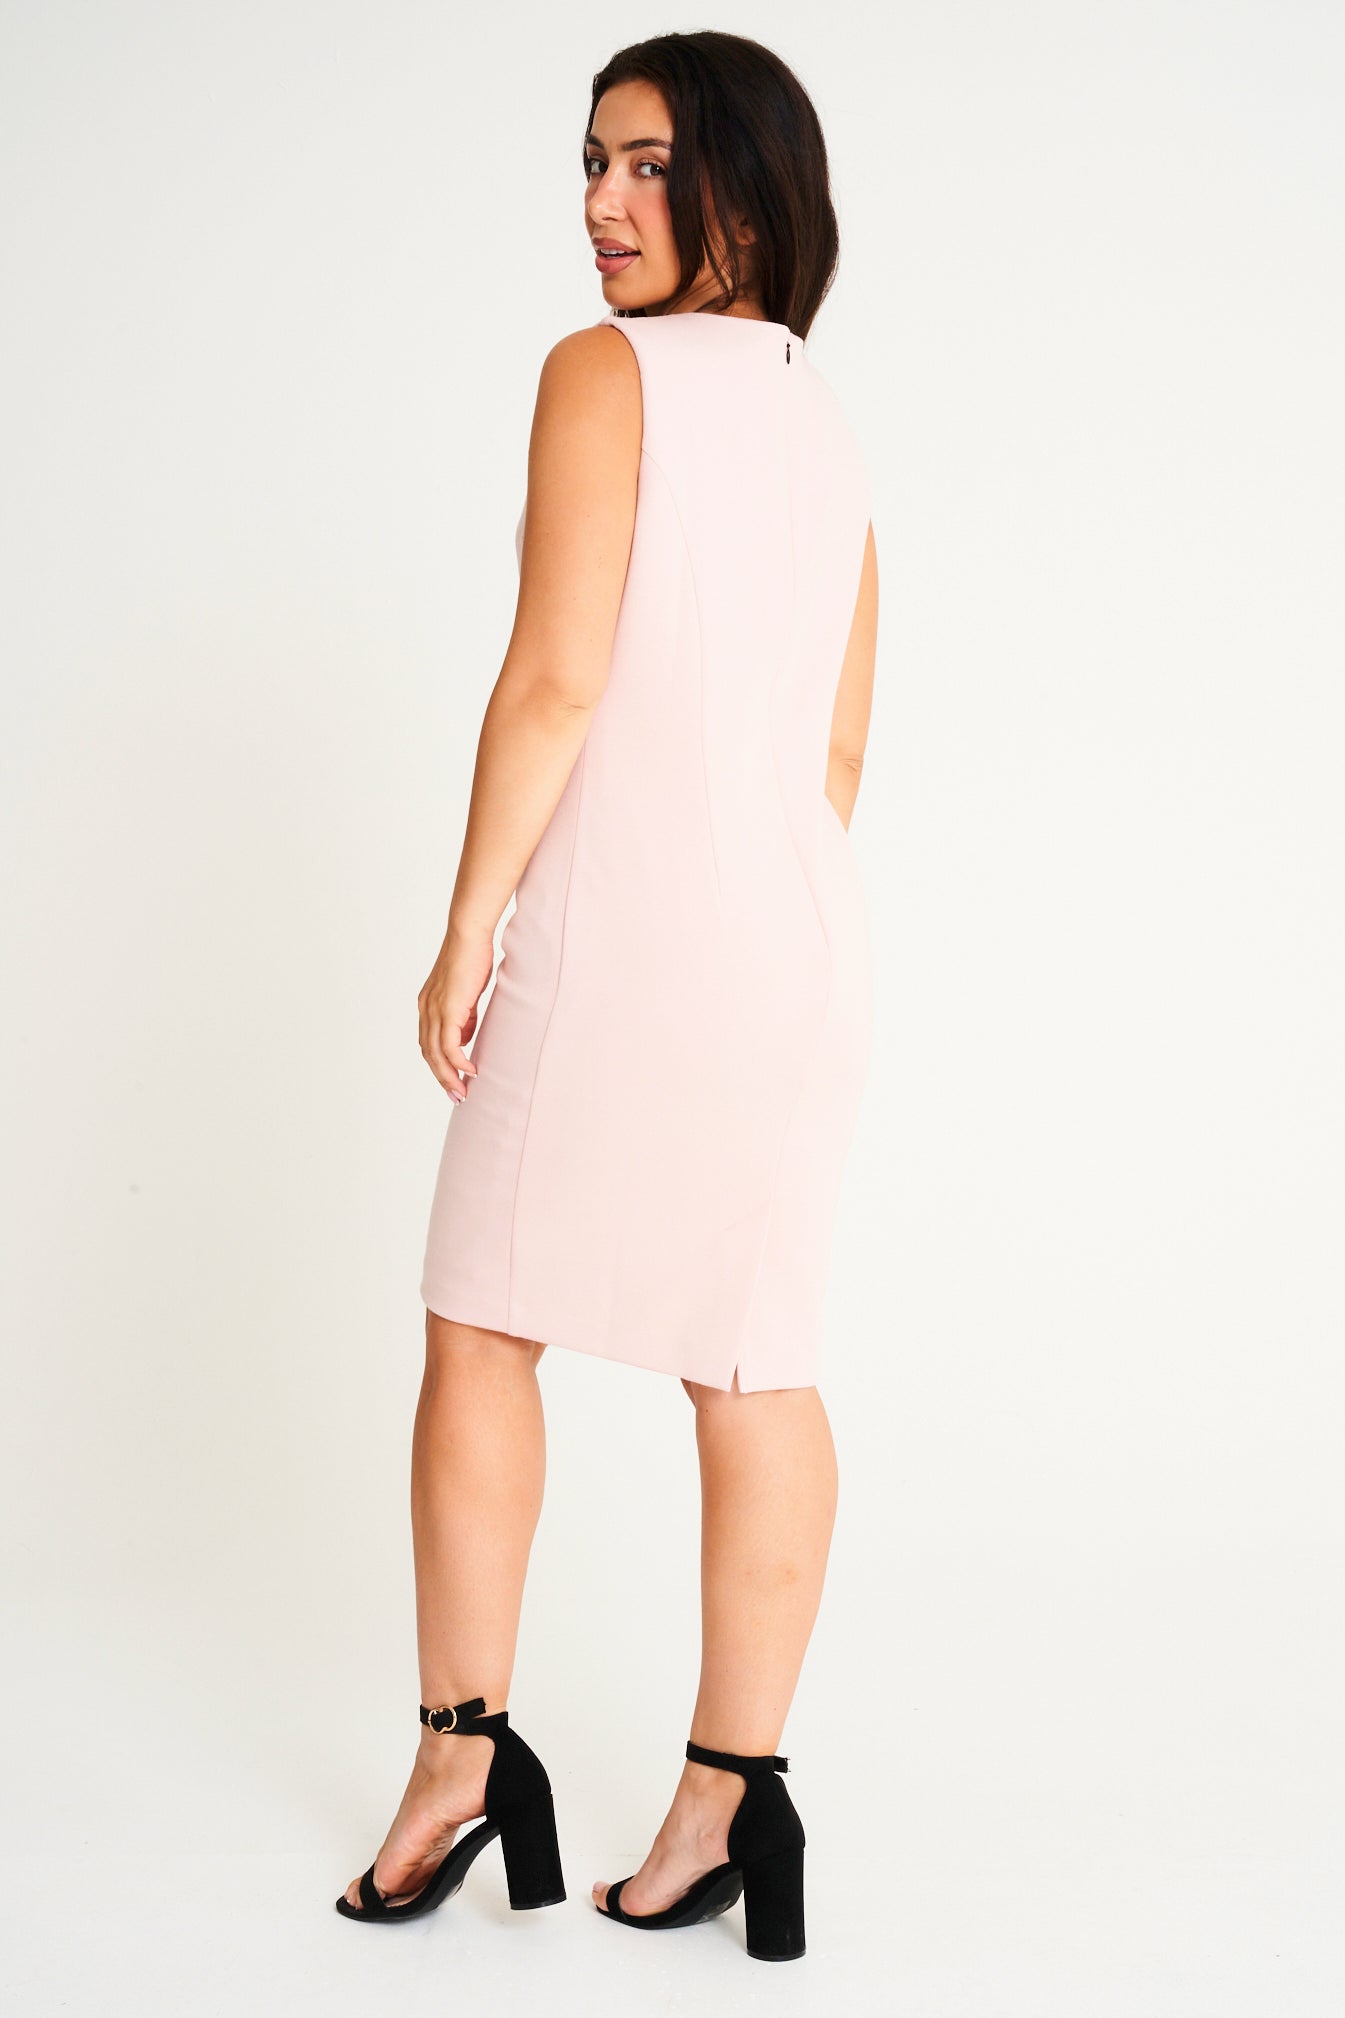 The MAYFAIR dress baby pink